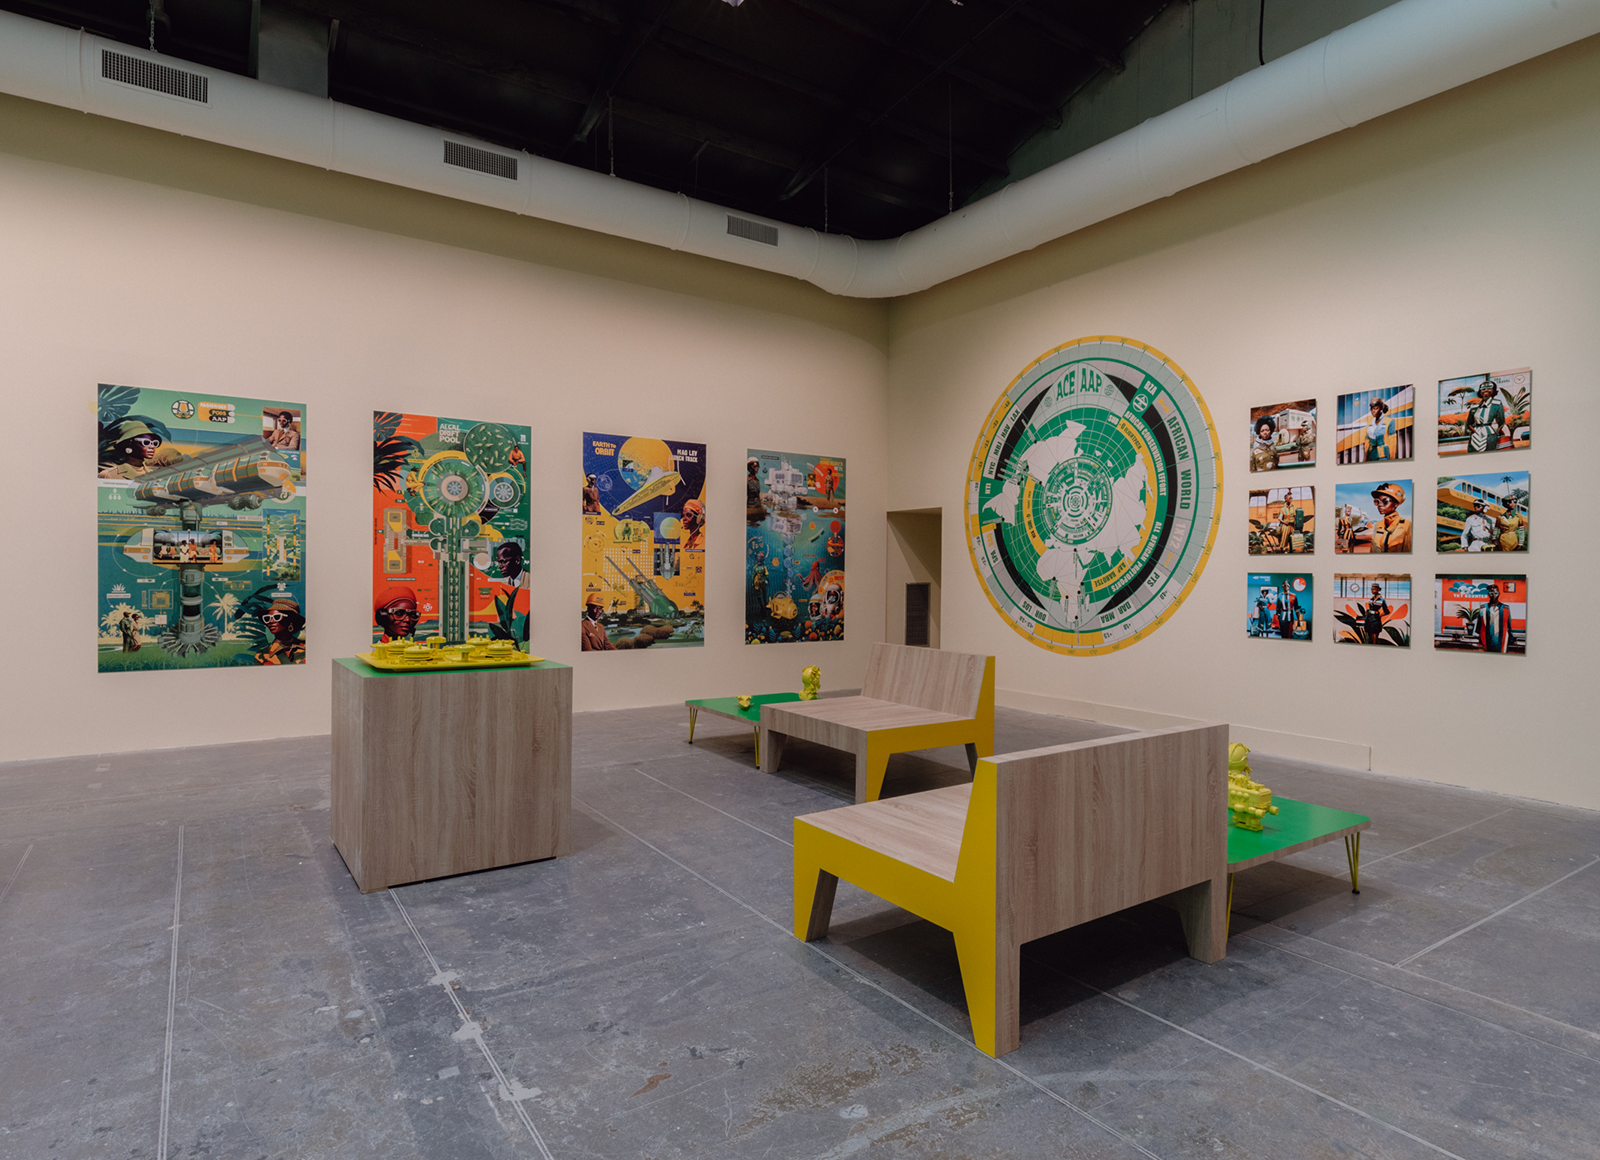 https://aap.cornell.edu/Fictional%20waiting%20lounge%20featuring%20bright%20green%20tables%2C%20yellow%20sculptures%2C%20and%20hung%20travel%20posters